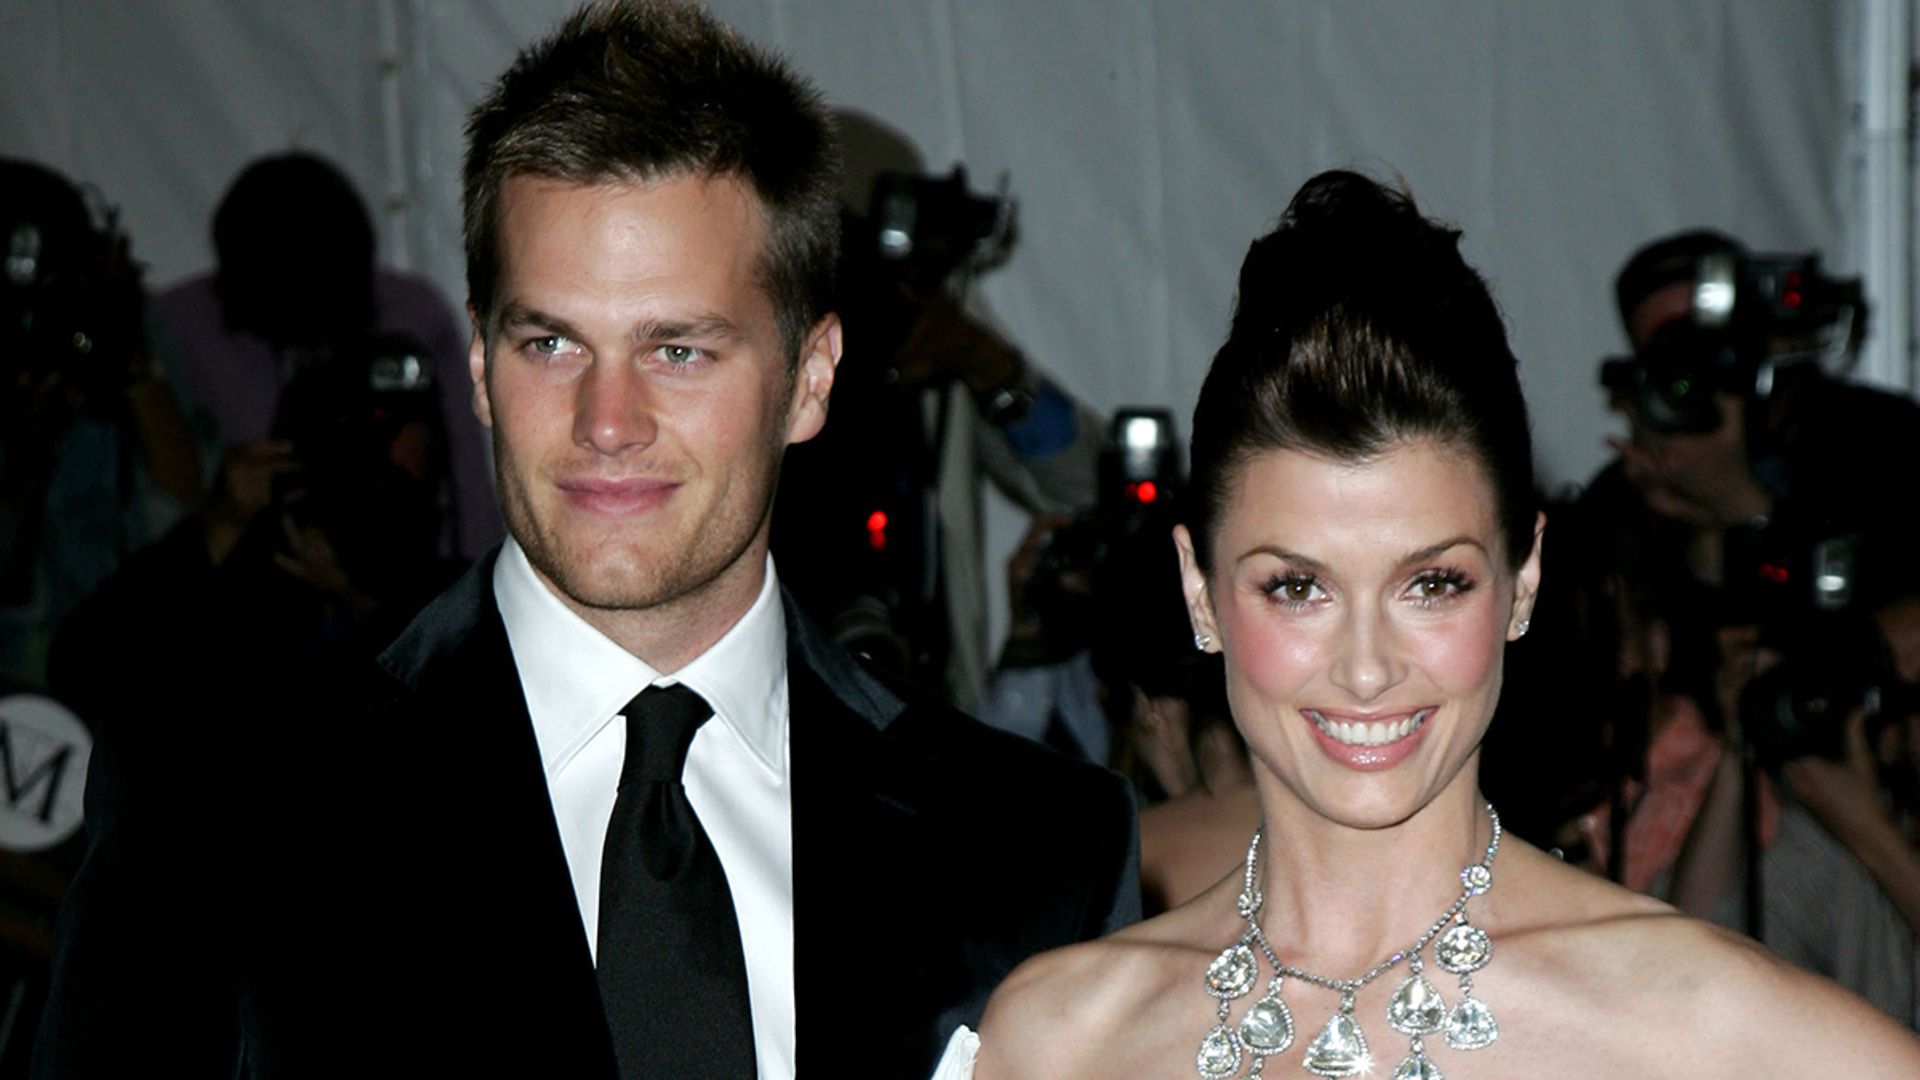 Tom Brady poses with ex Bridget Moynahan and son following retirement news